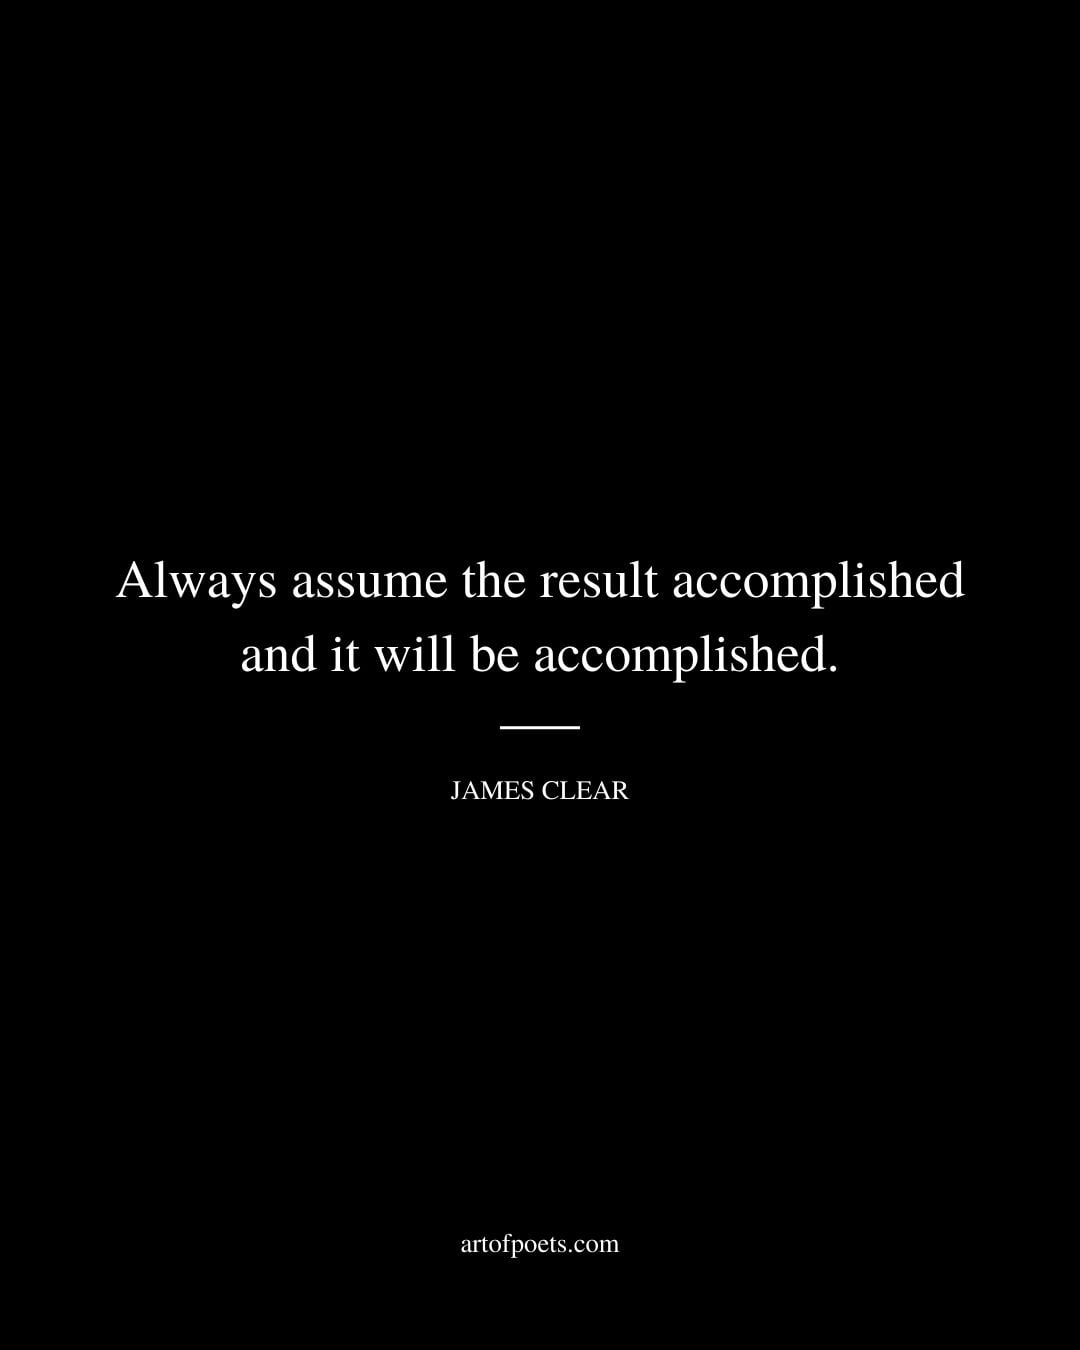 Always assume the result accomplished and it will be accomplished